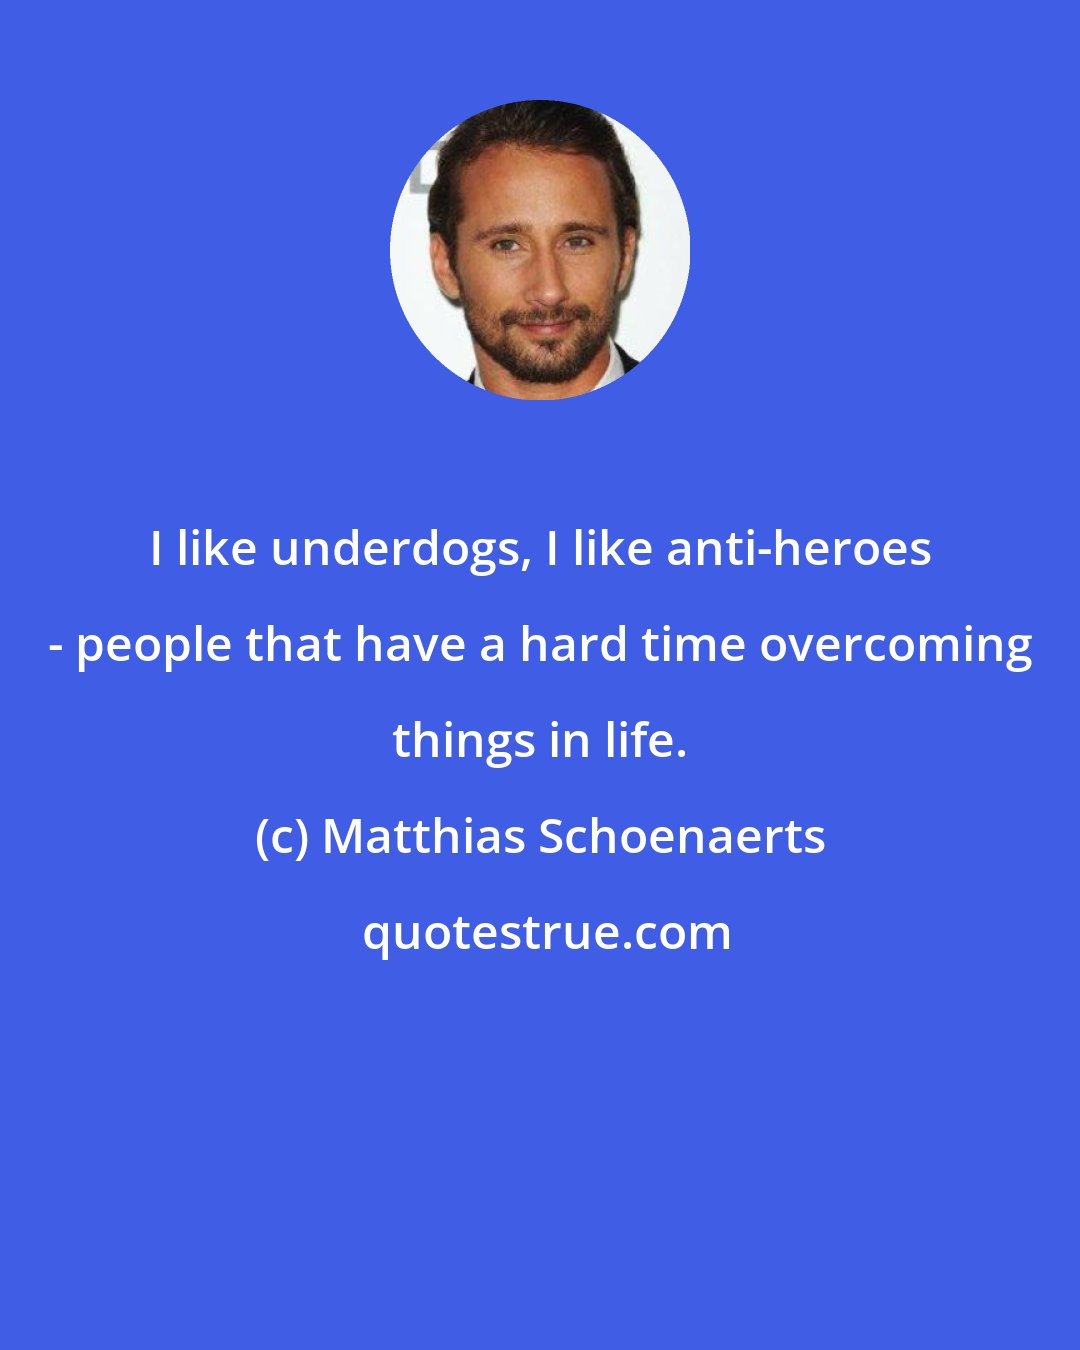 Matthias Schoenaerts: I like underdogs, I like anti-heroes - people that have a hard time overcoming things in life.